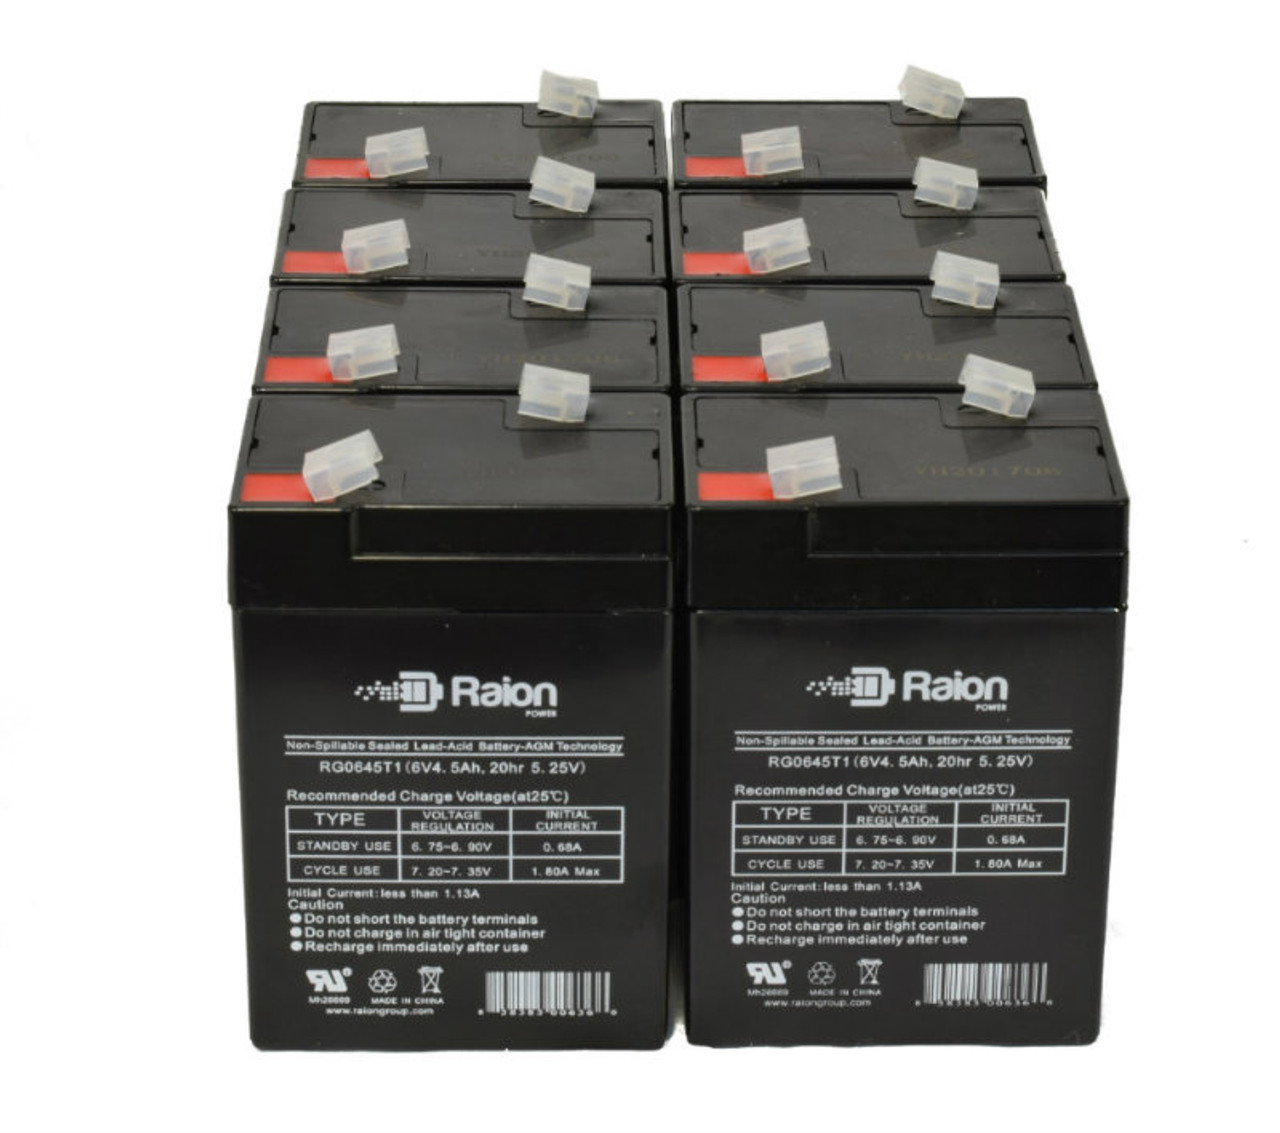 Raion Power RG0645T1 6V 4.5Ah Replacement Medical Equipment Battery for Abbott Laboratories 1050 Controller - 8 Pack